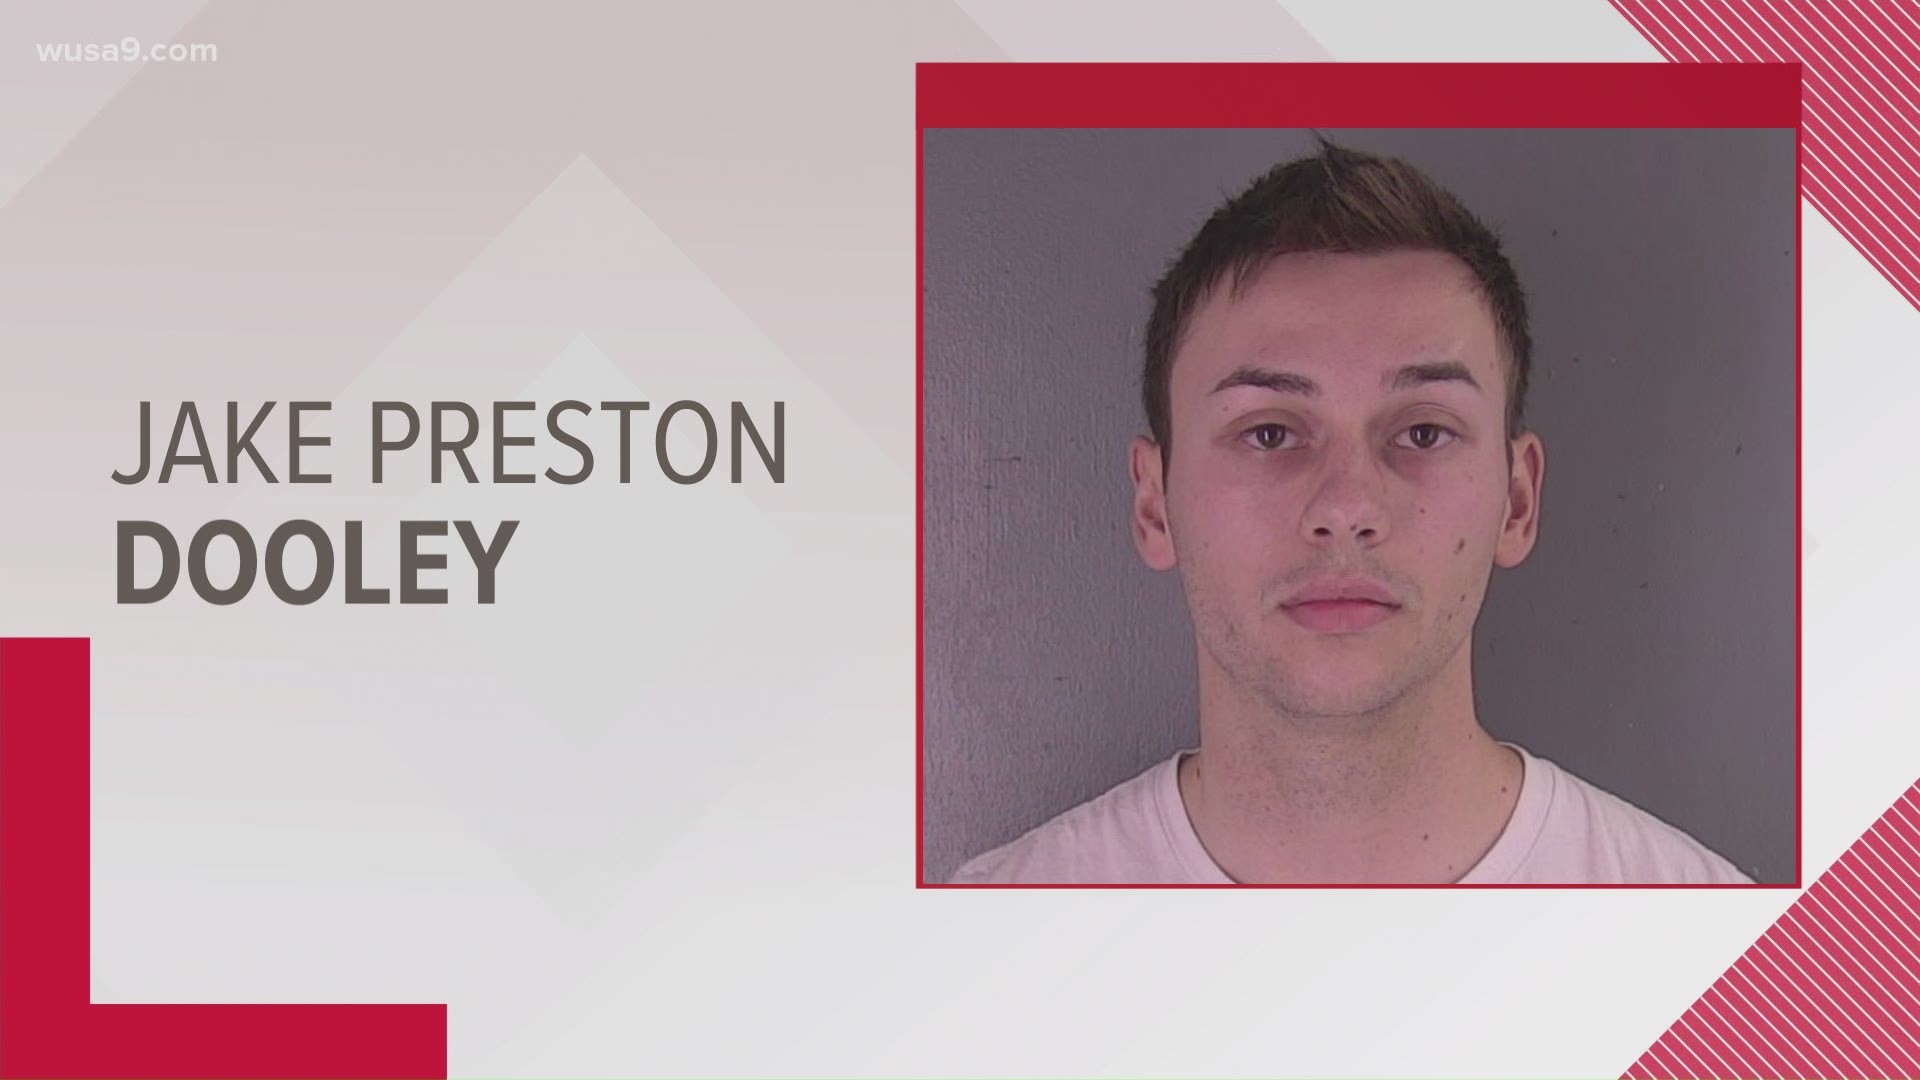 22-year-old Jake Preston Dooley is the deputy who has been charged with falsely summonsing law enforcement and obstruction of justice.